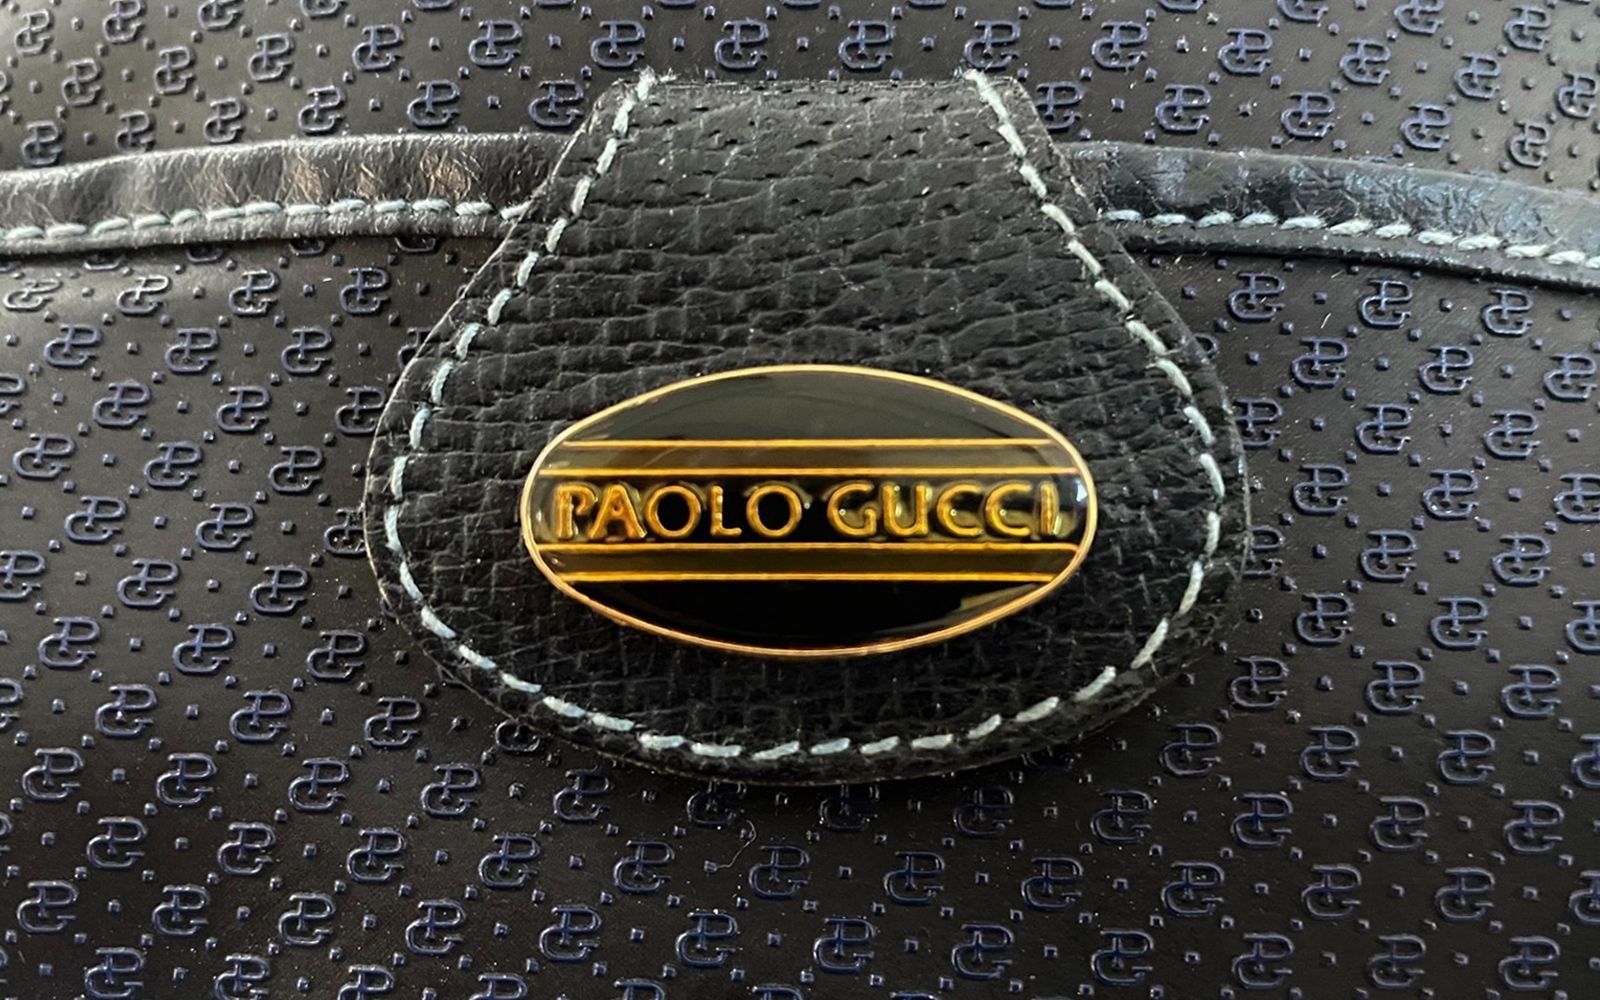 Paolo Gucci: all there is to know